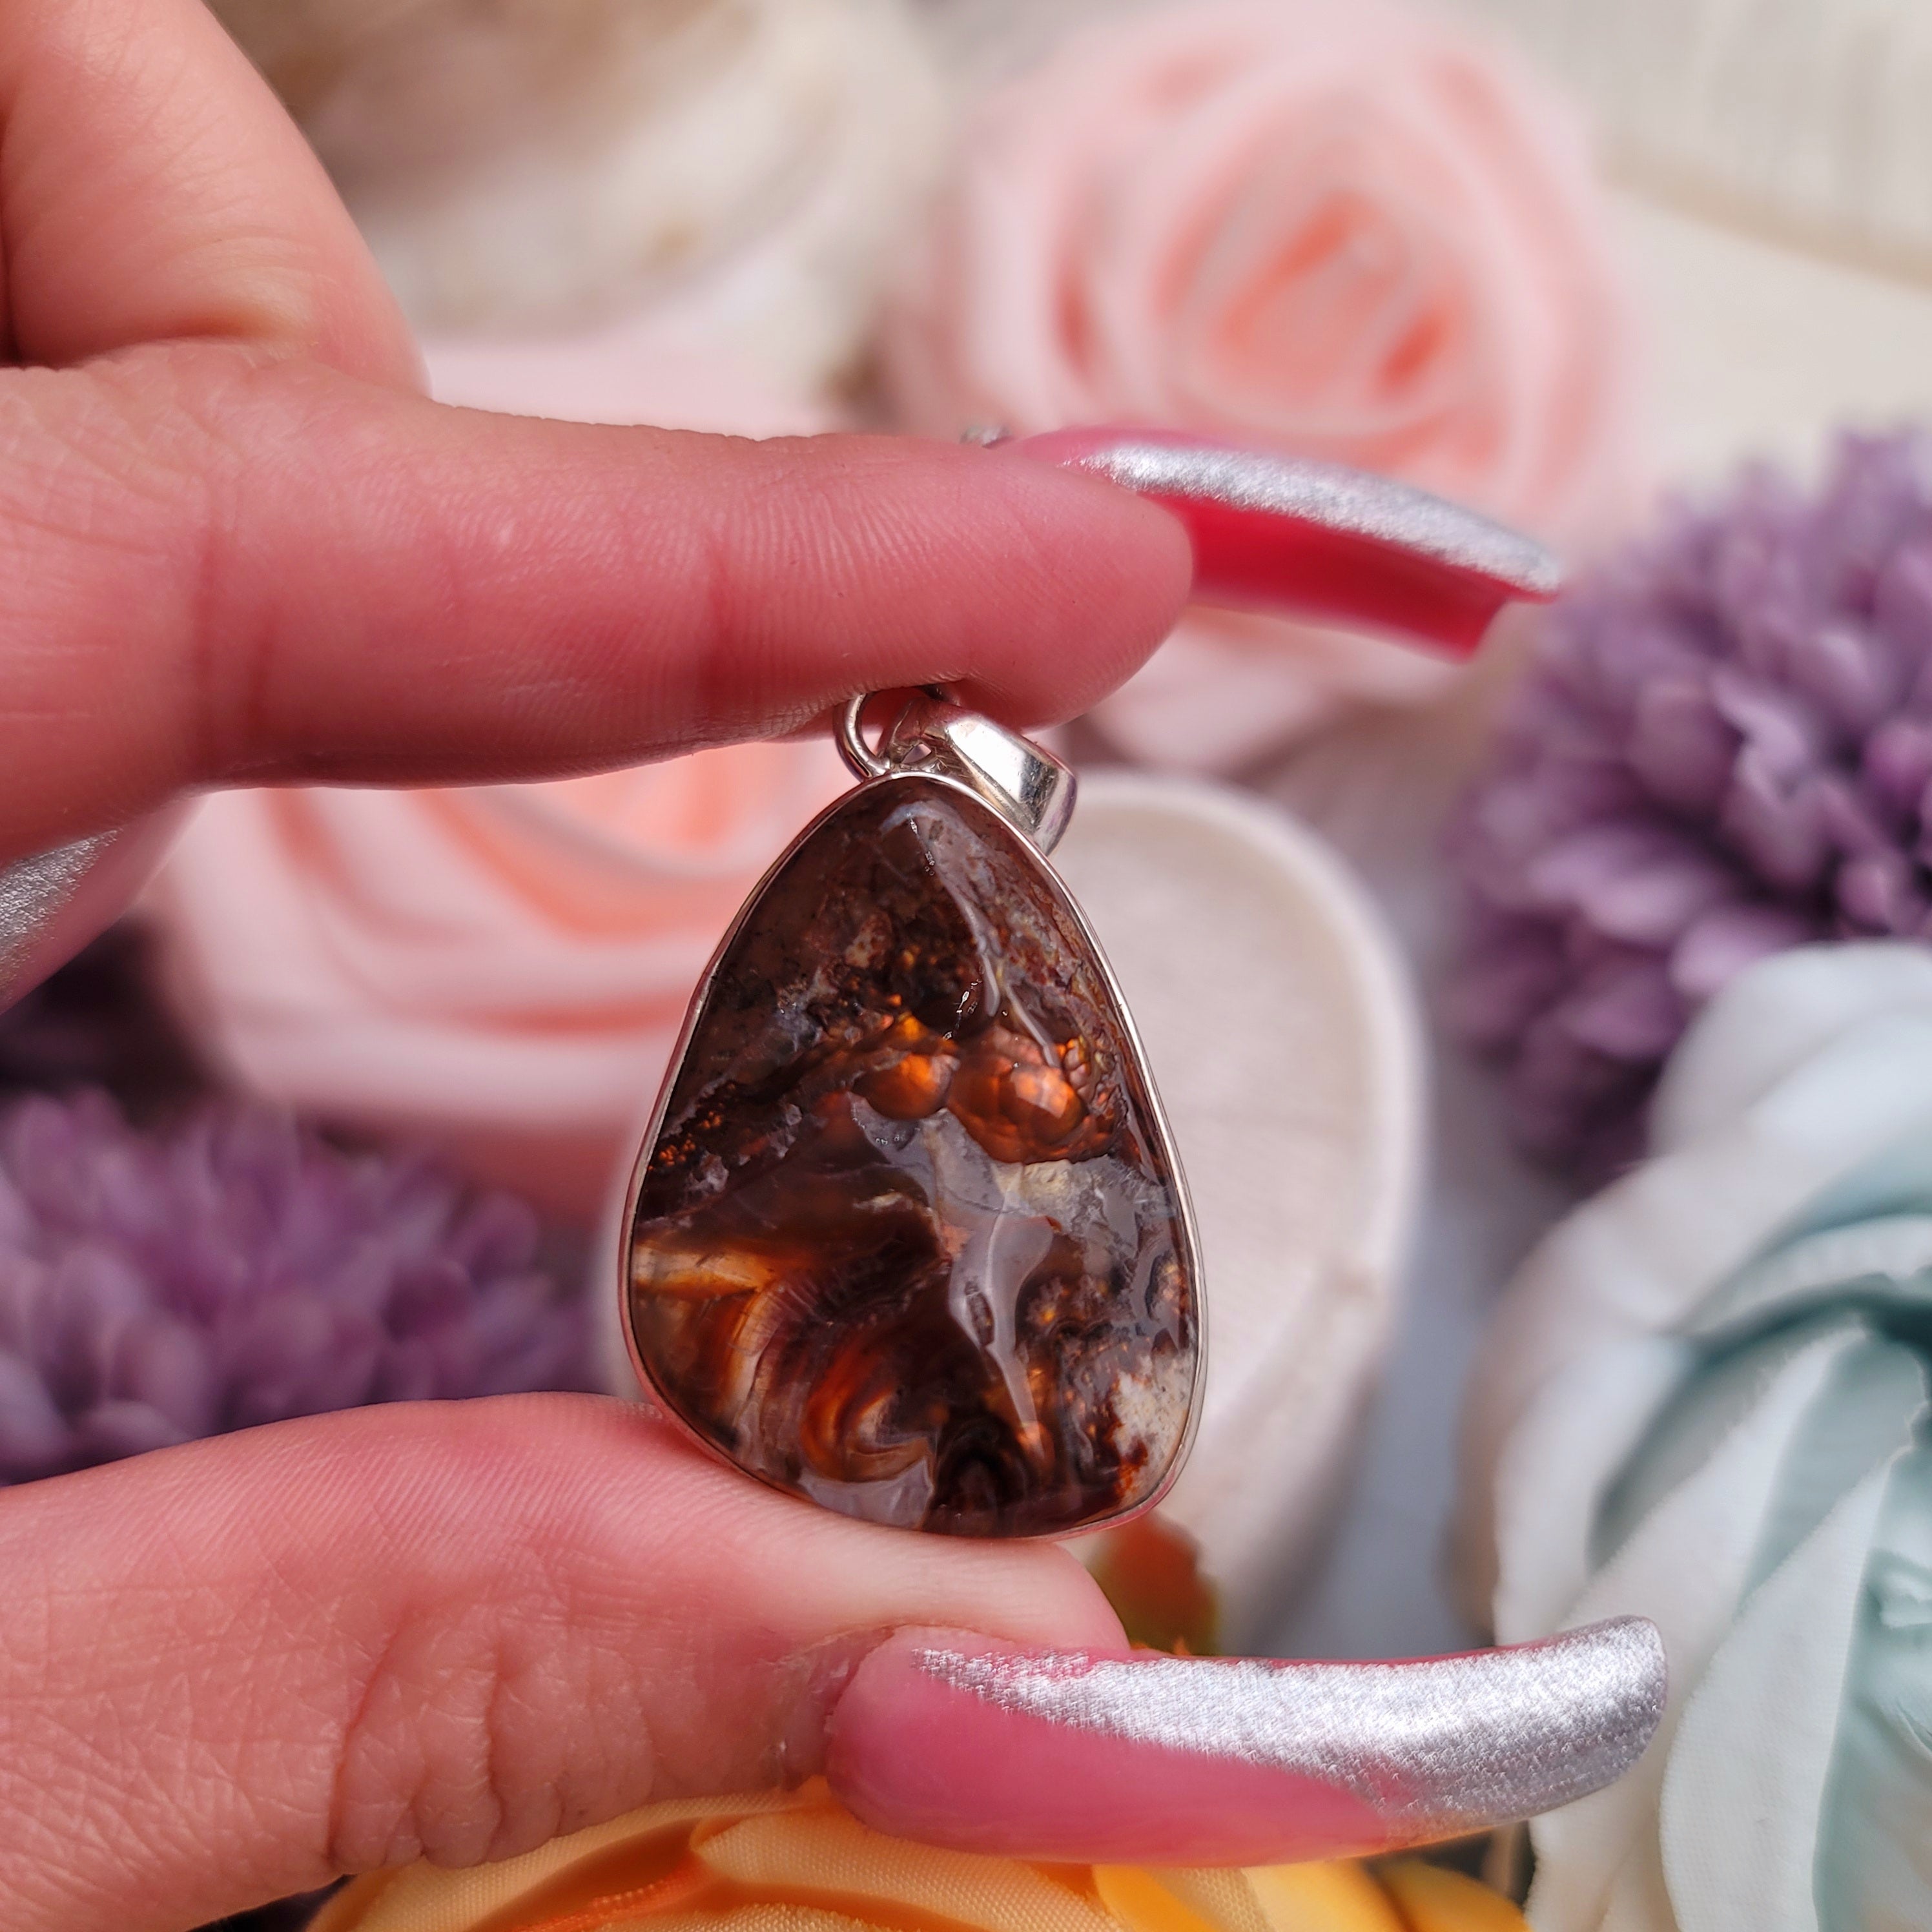 Fire Agate Pendant for Emotional Support, Joy and Self Worth